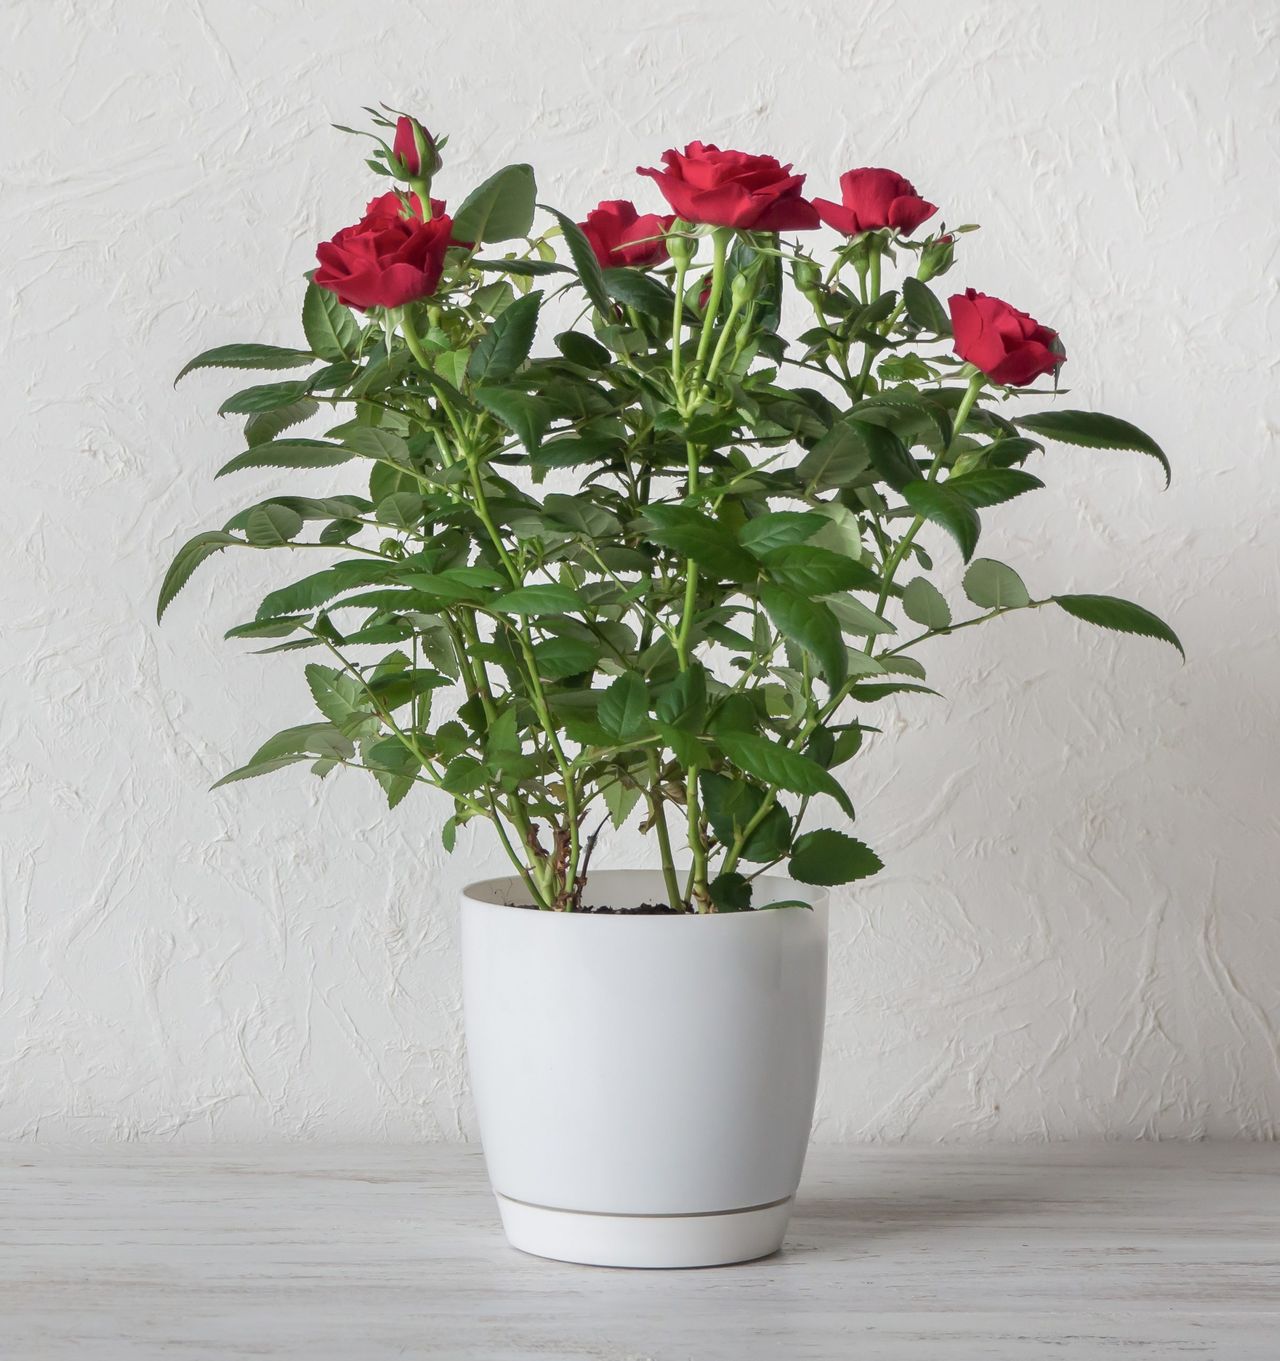 Red rose in a pot on a wooden table, copy space.